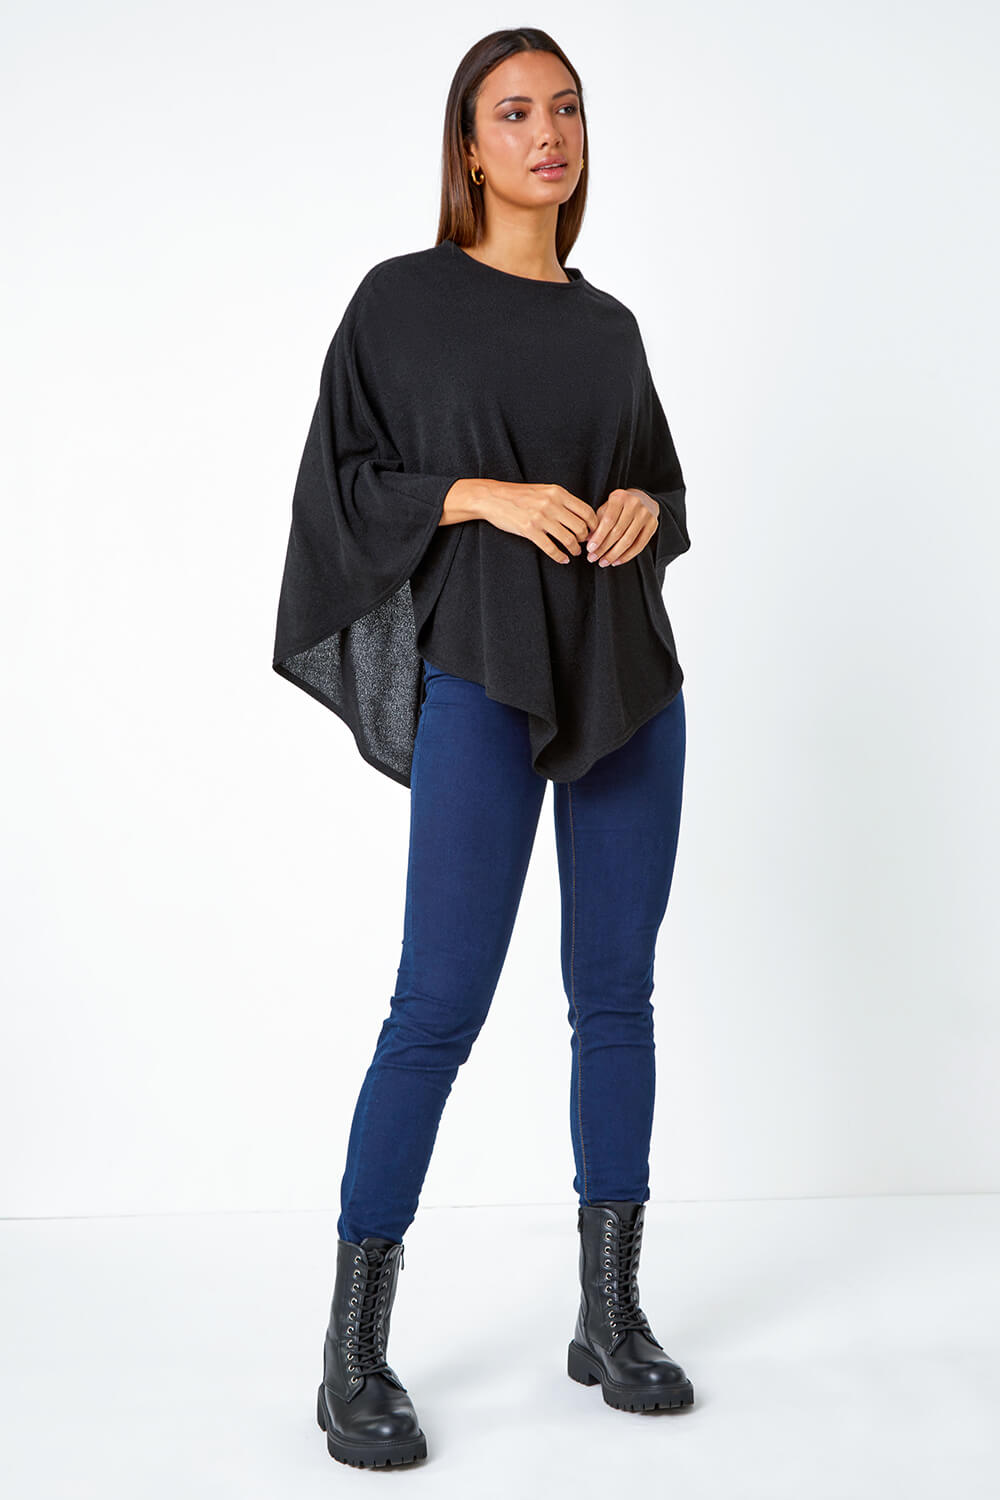 Marl Overlay Stretch Top